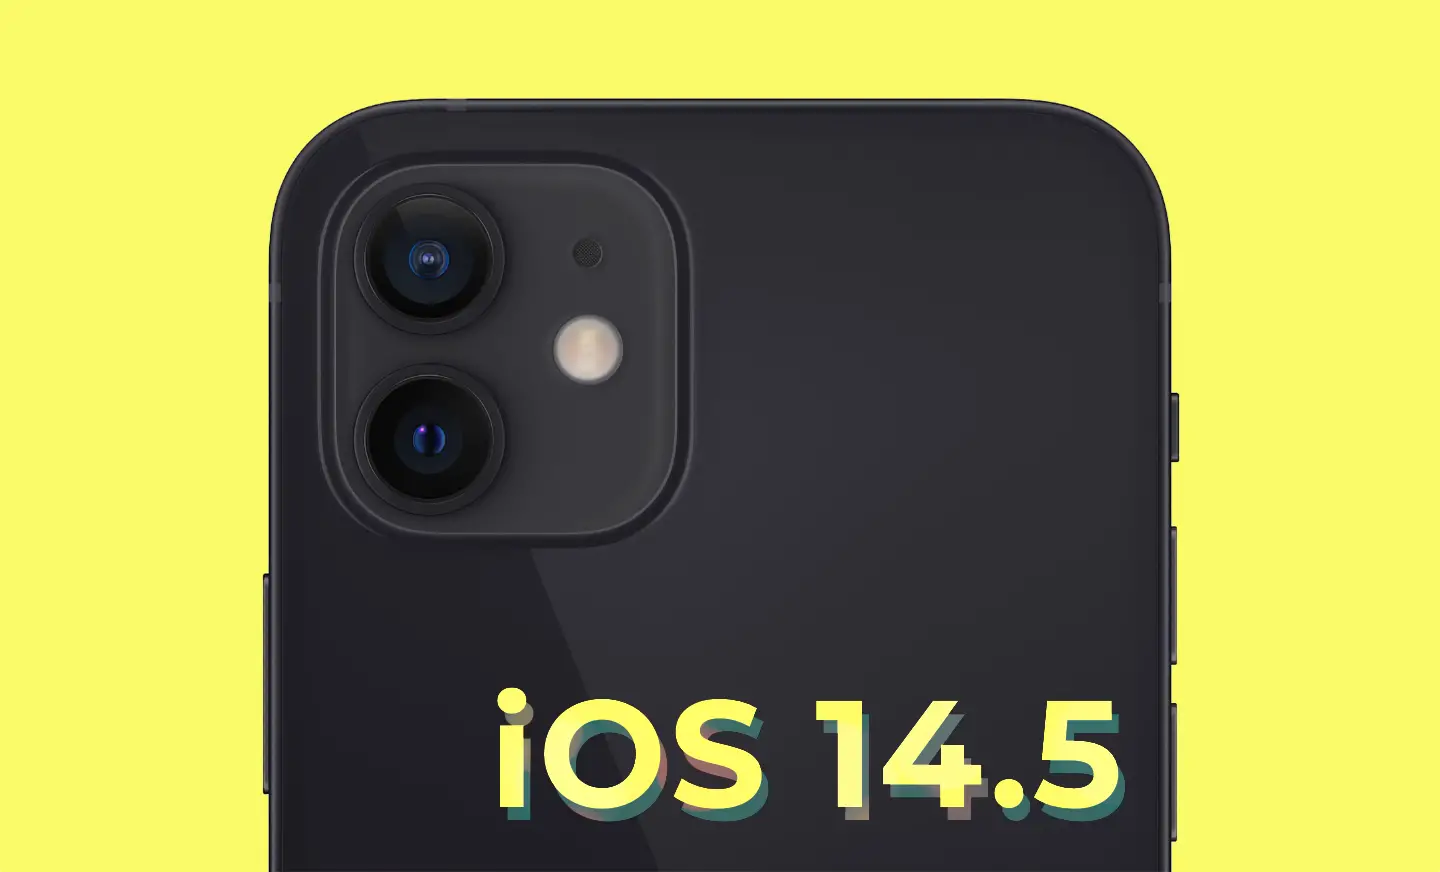 What's new in iOS 14.5